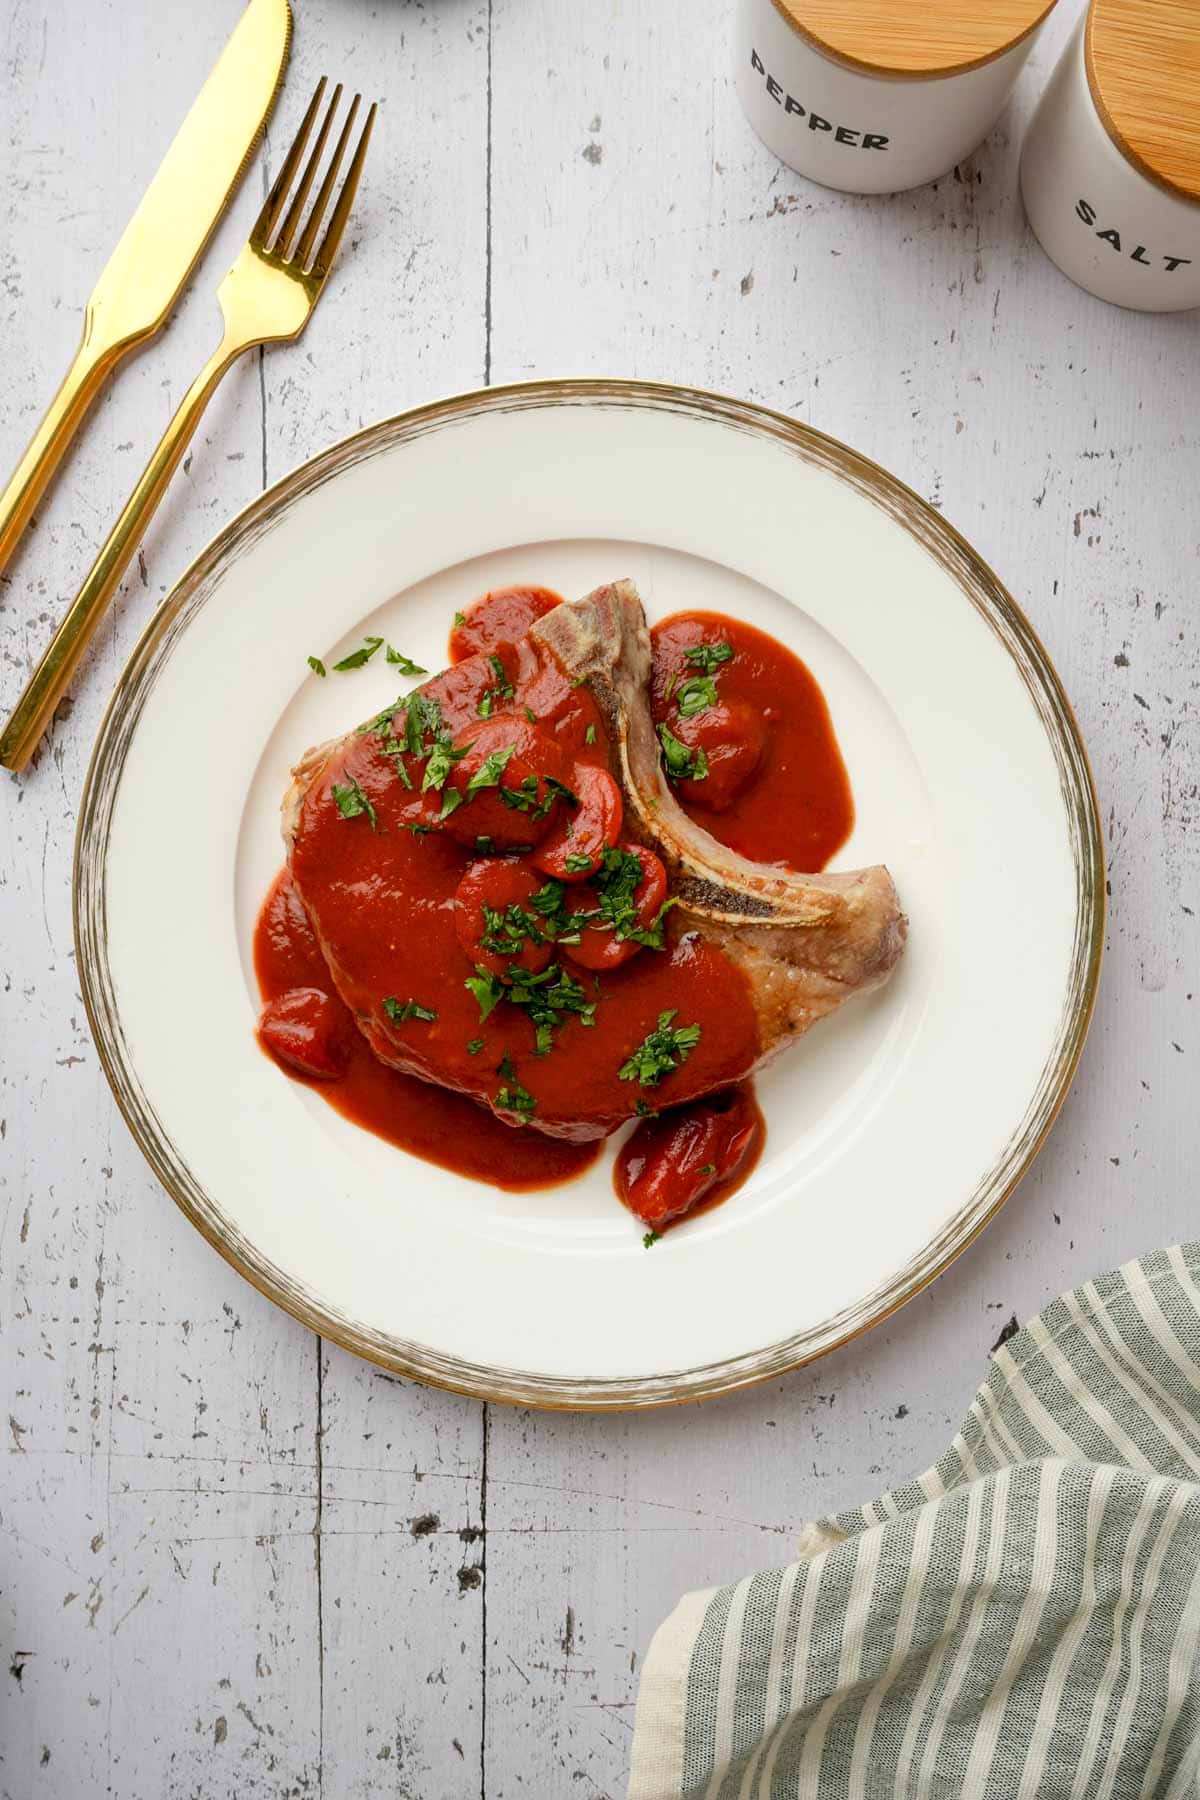 sous vide bone in pork chops on a plate smothered in tomato glaze and herbs